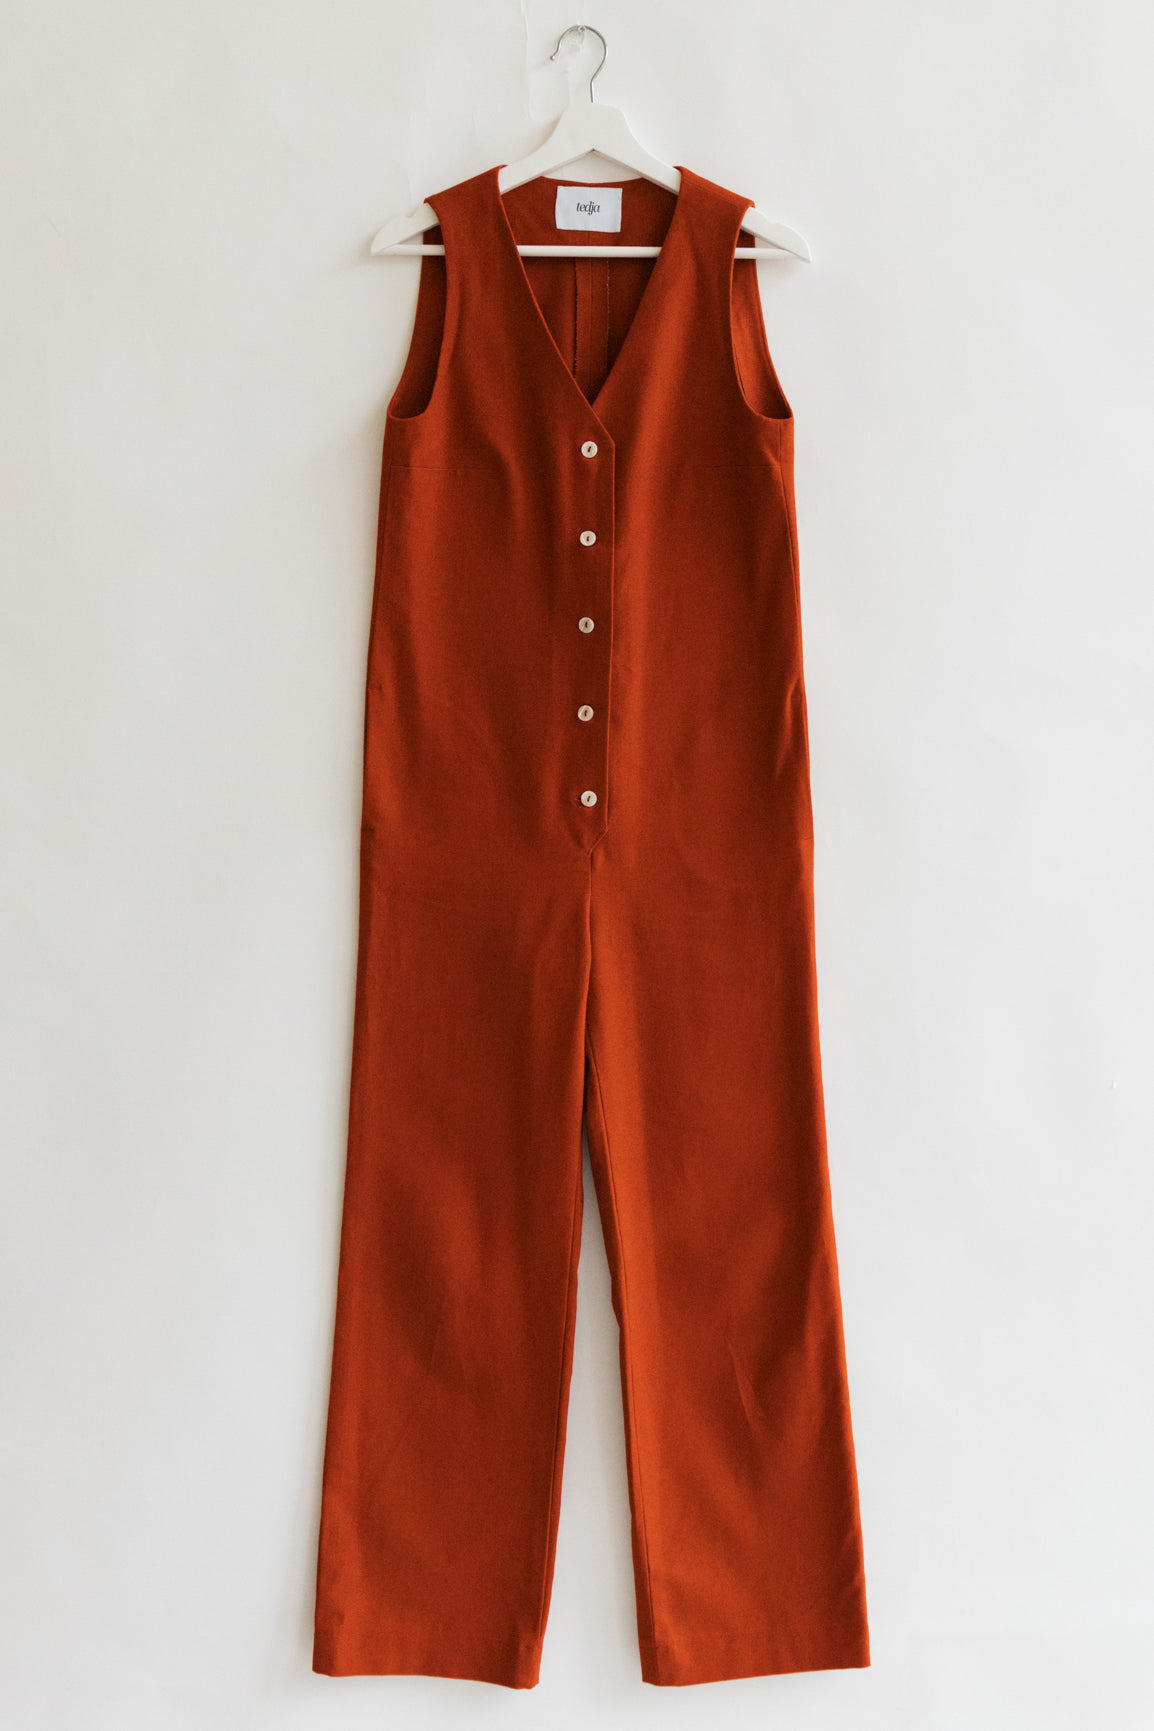 Burnt Orange rust sienna terracotta ginger color Jumpsuit overall workwear cotton canvas with pockets 5 buttons v-neck tall girls short girls oeko-tex sustainable clothes handmade